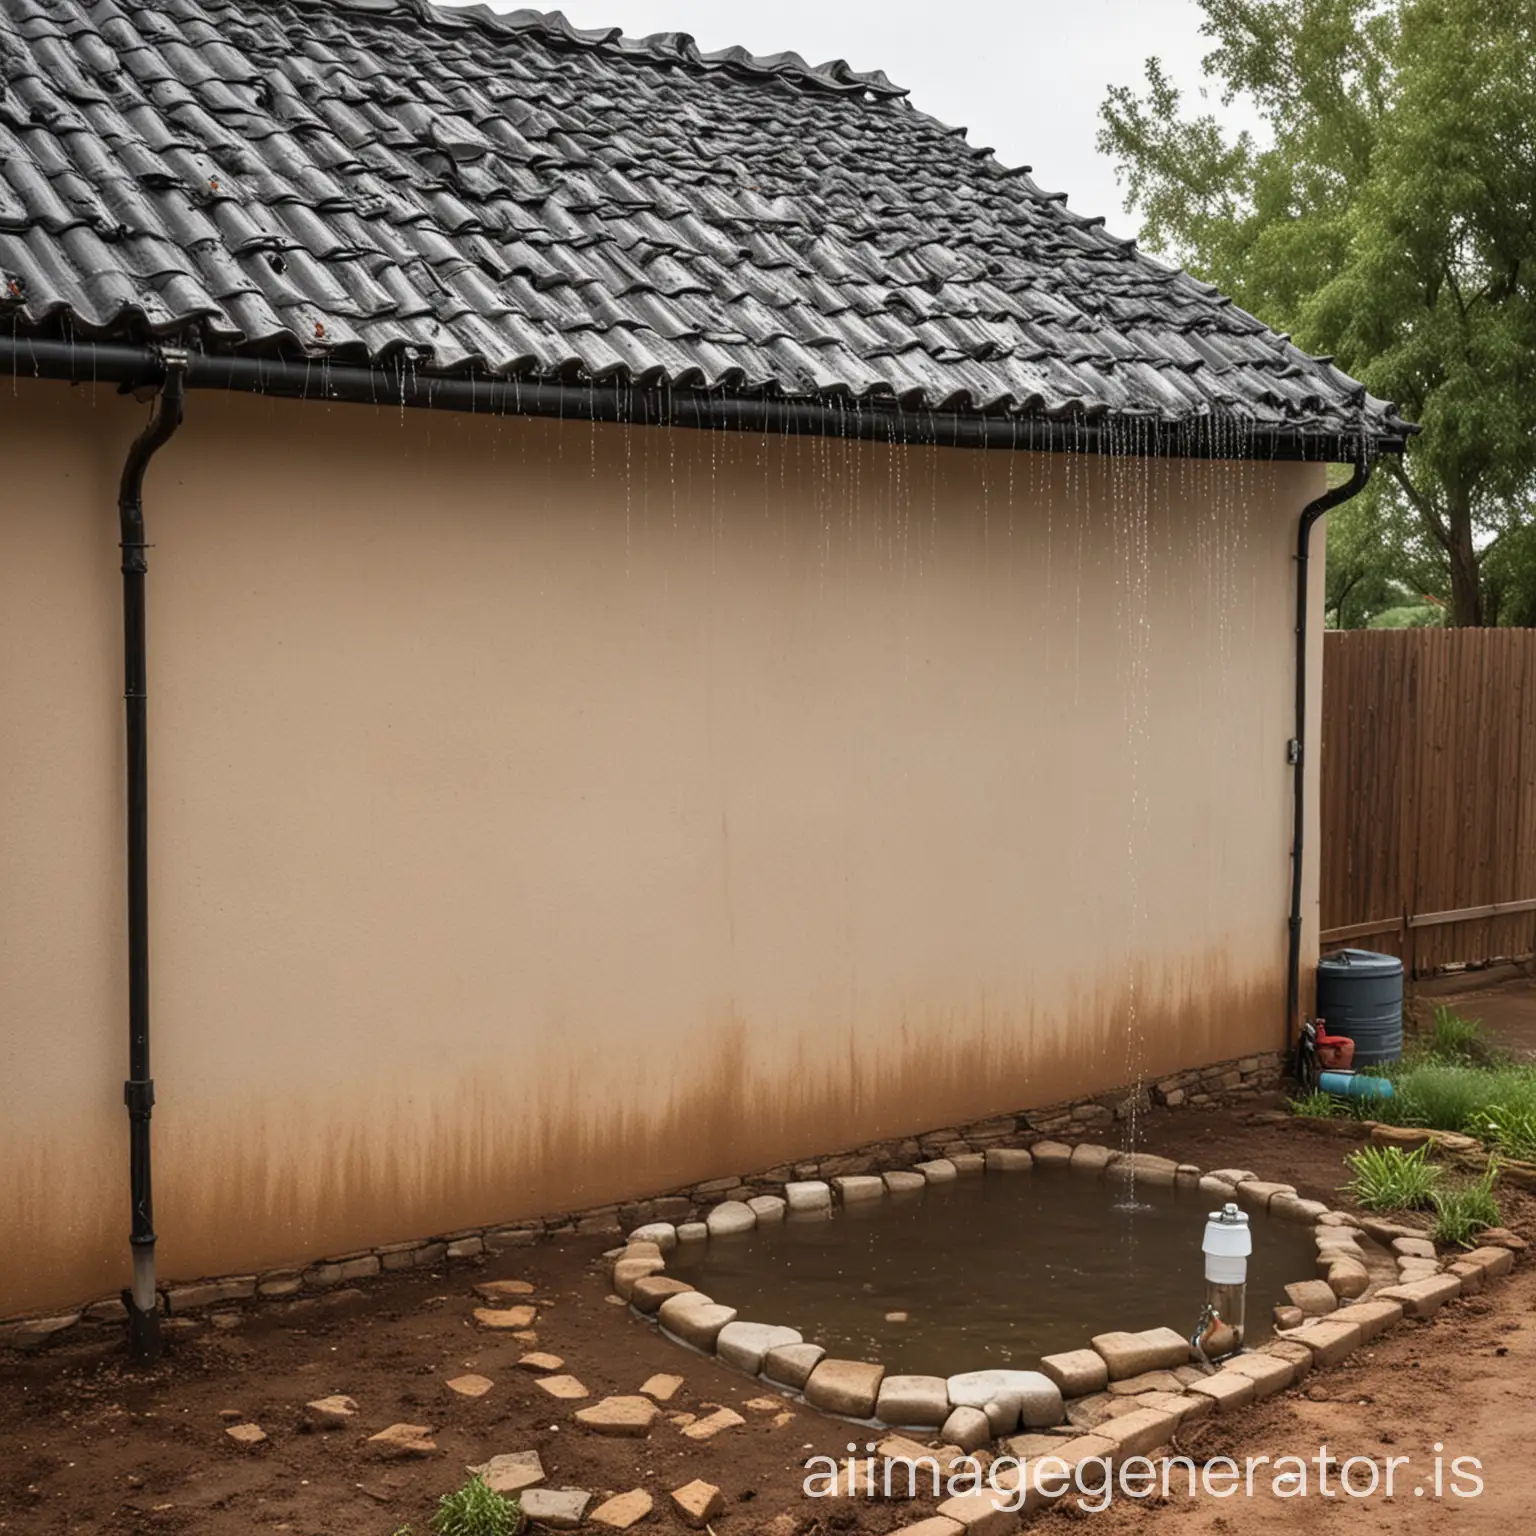 rainwater harvesting and conserving water.